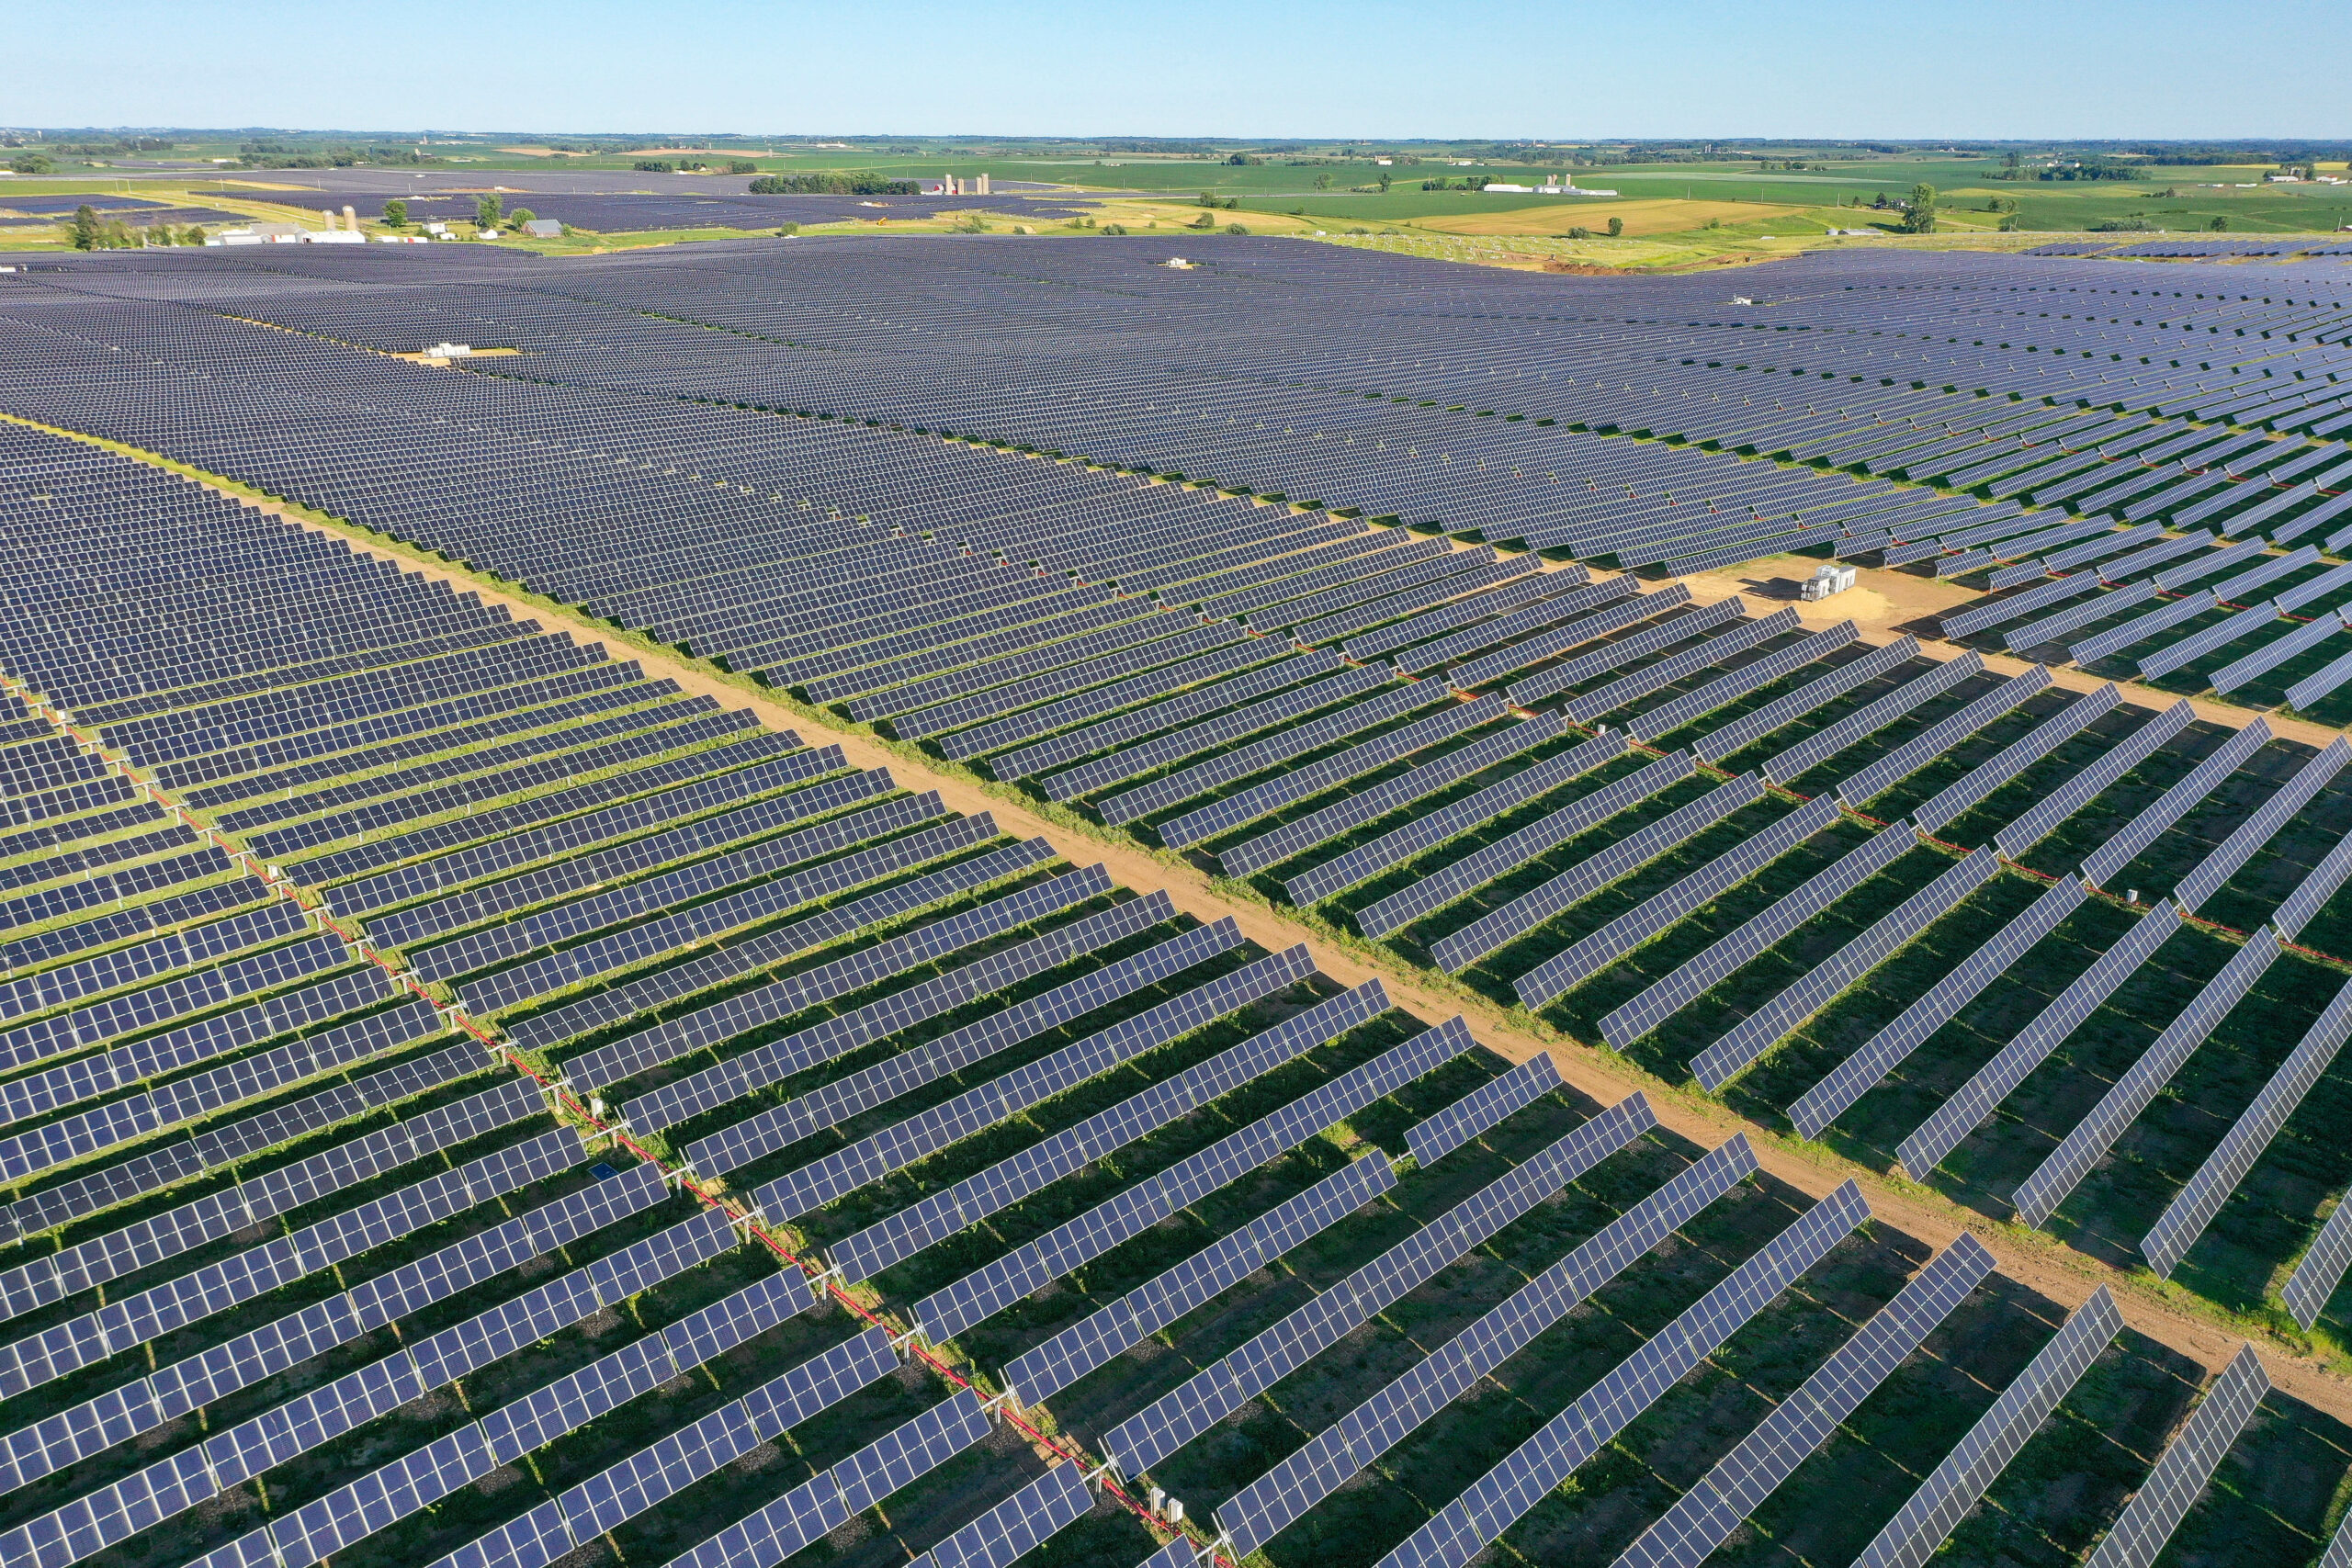 A view of some of the nearly 500,000 solar panels installed at first phase of the Badger Hollow Solar Park in southwestern Wisconsin.